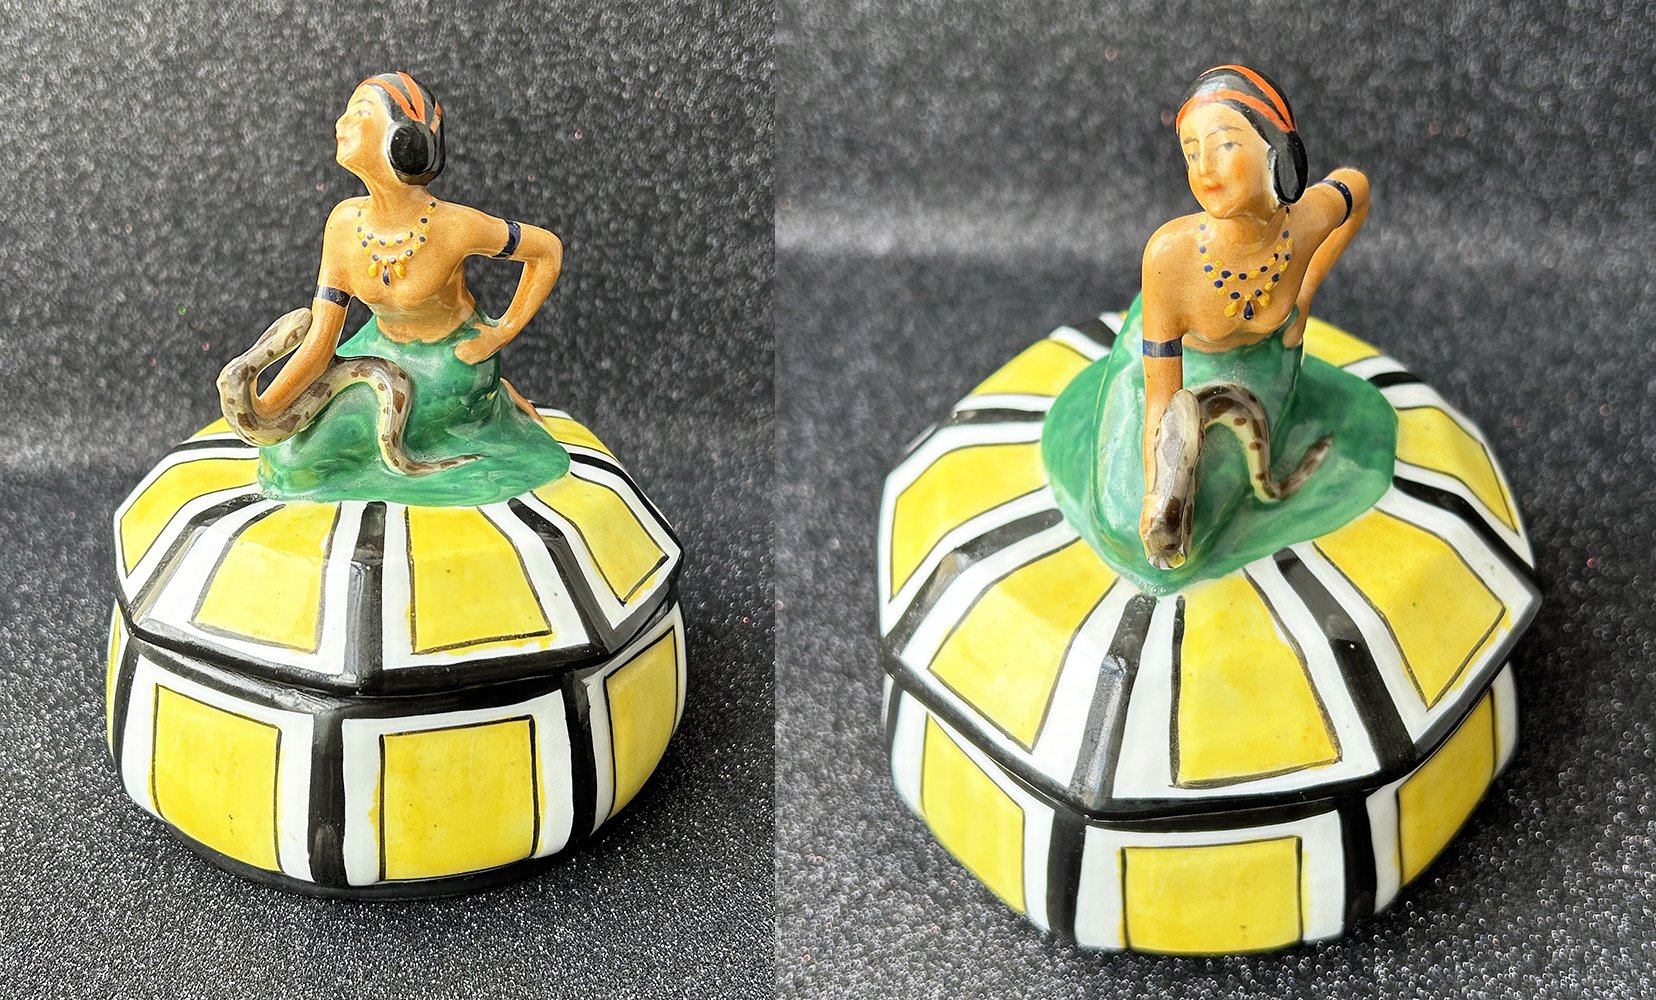   Powder Box  Ca. 1920s   This German-made, porcelain powder box features a seated dark-haired woman holding a snake. The color of her skin is noticeably darker than in other examples of figural powder boxes of the era. The woman’s identity remains a